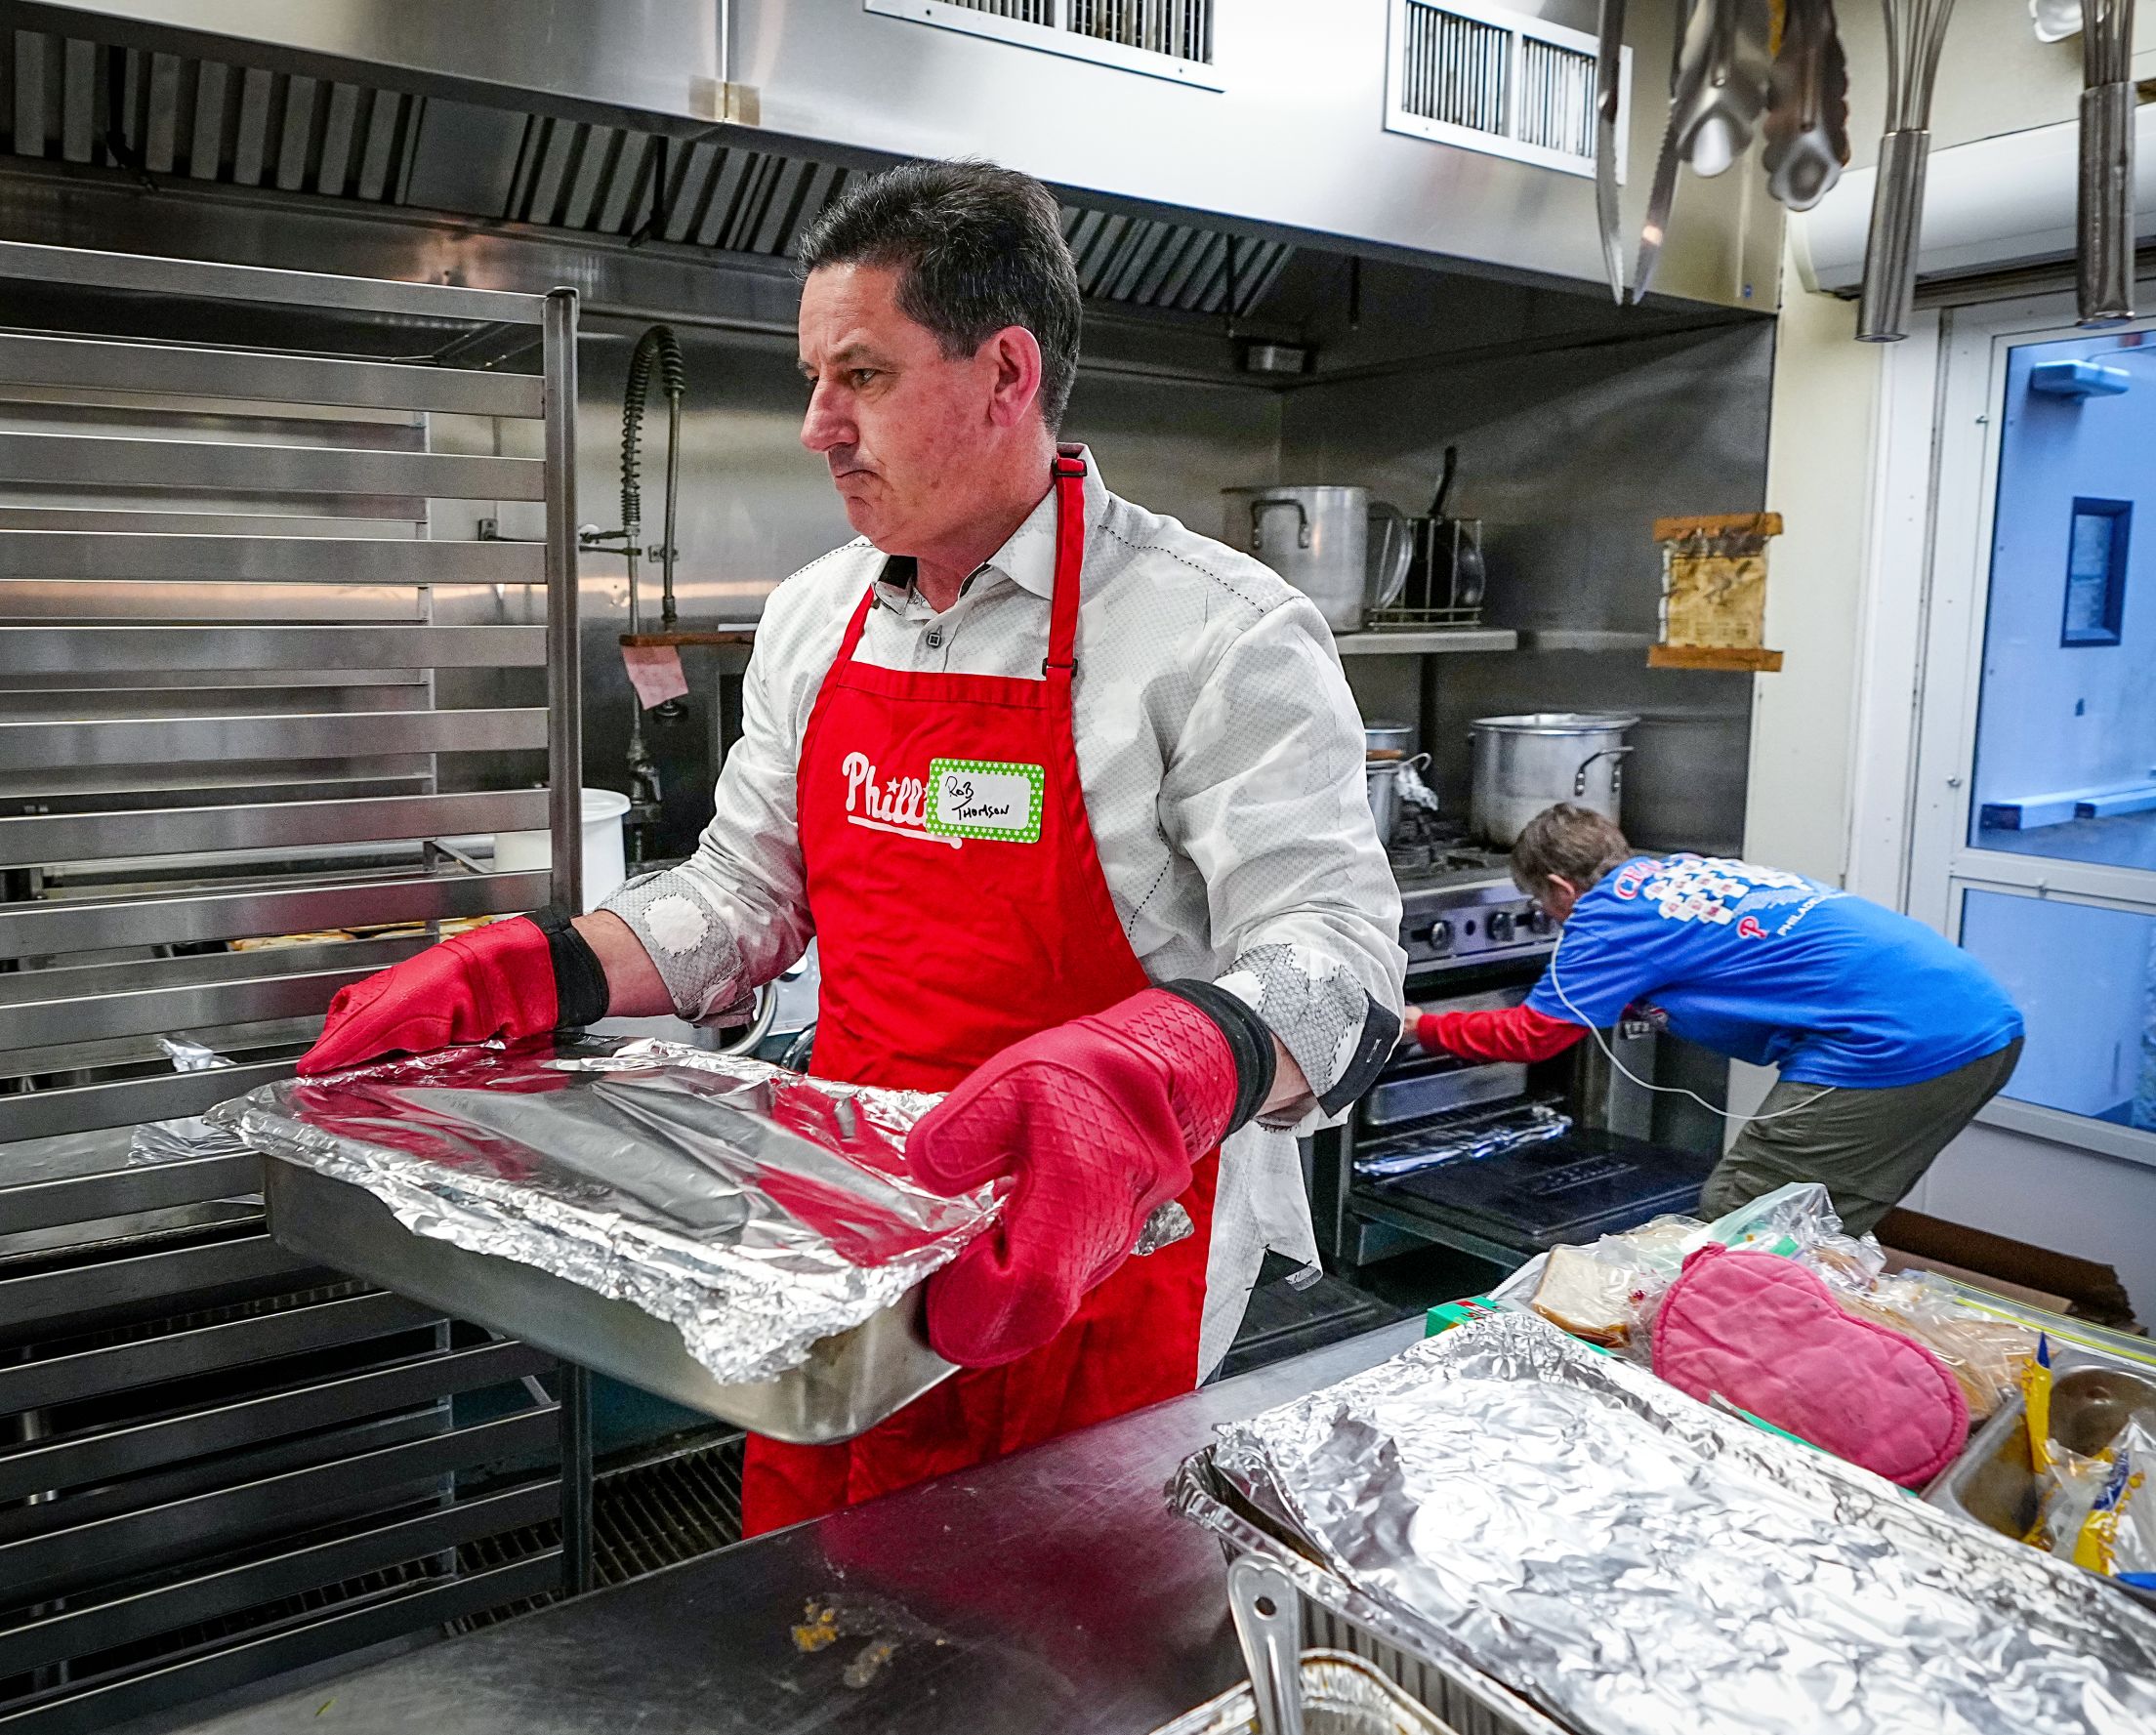 Phillies to serve meals at St. Francis Inn soup kitchen on